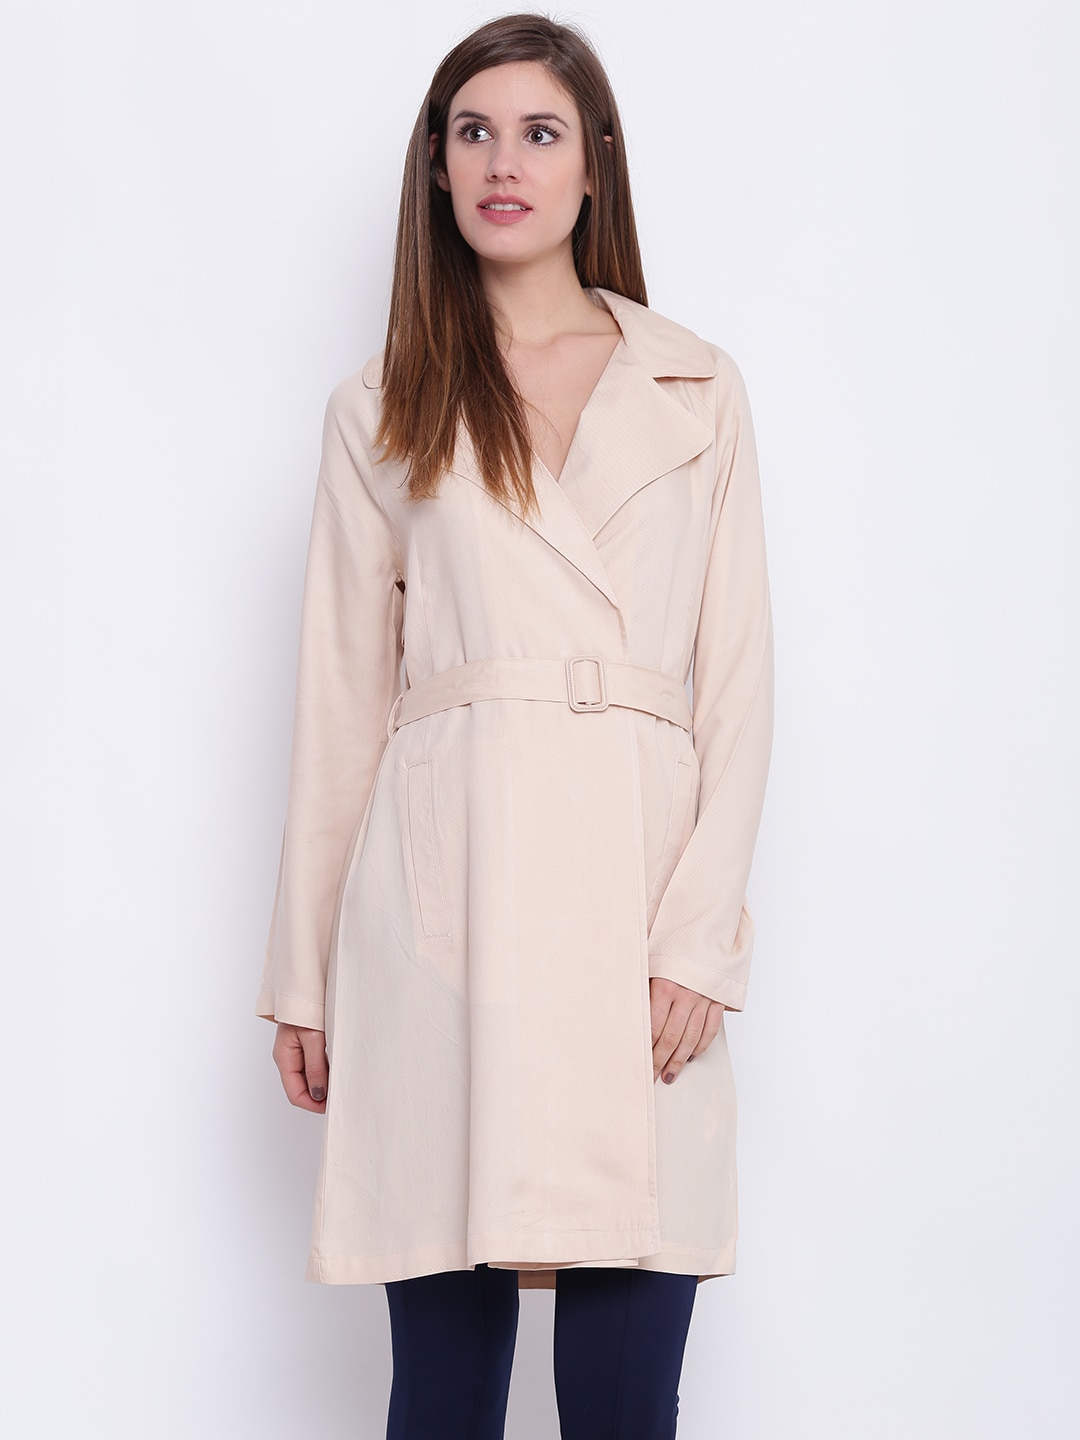 FOREVER 21 Women Peach-Coloured Solid Duster Jacket Price in India